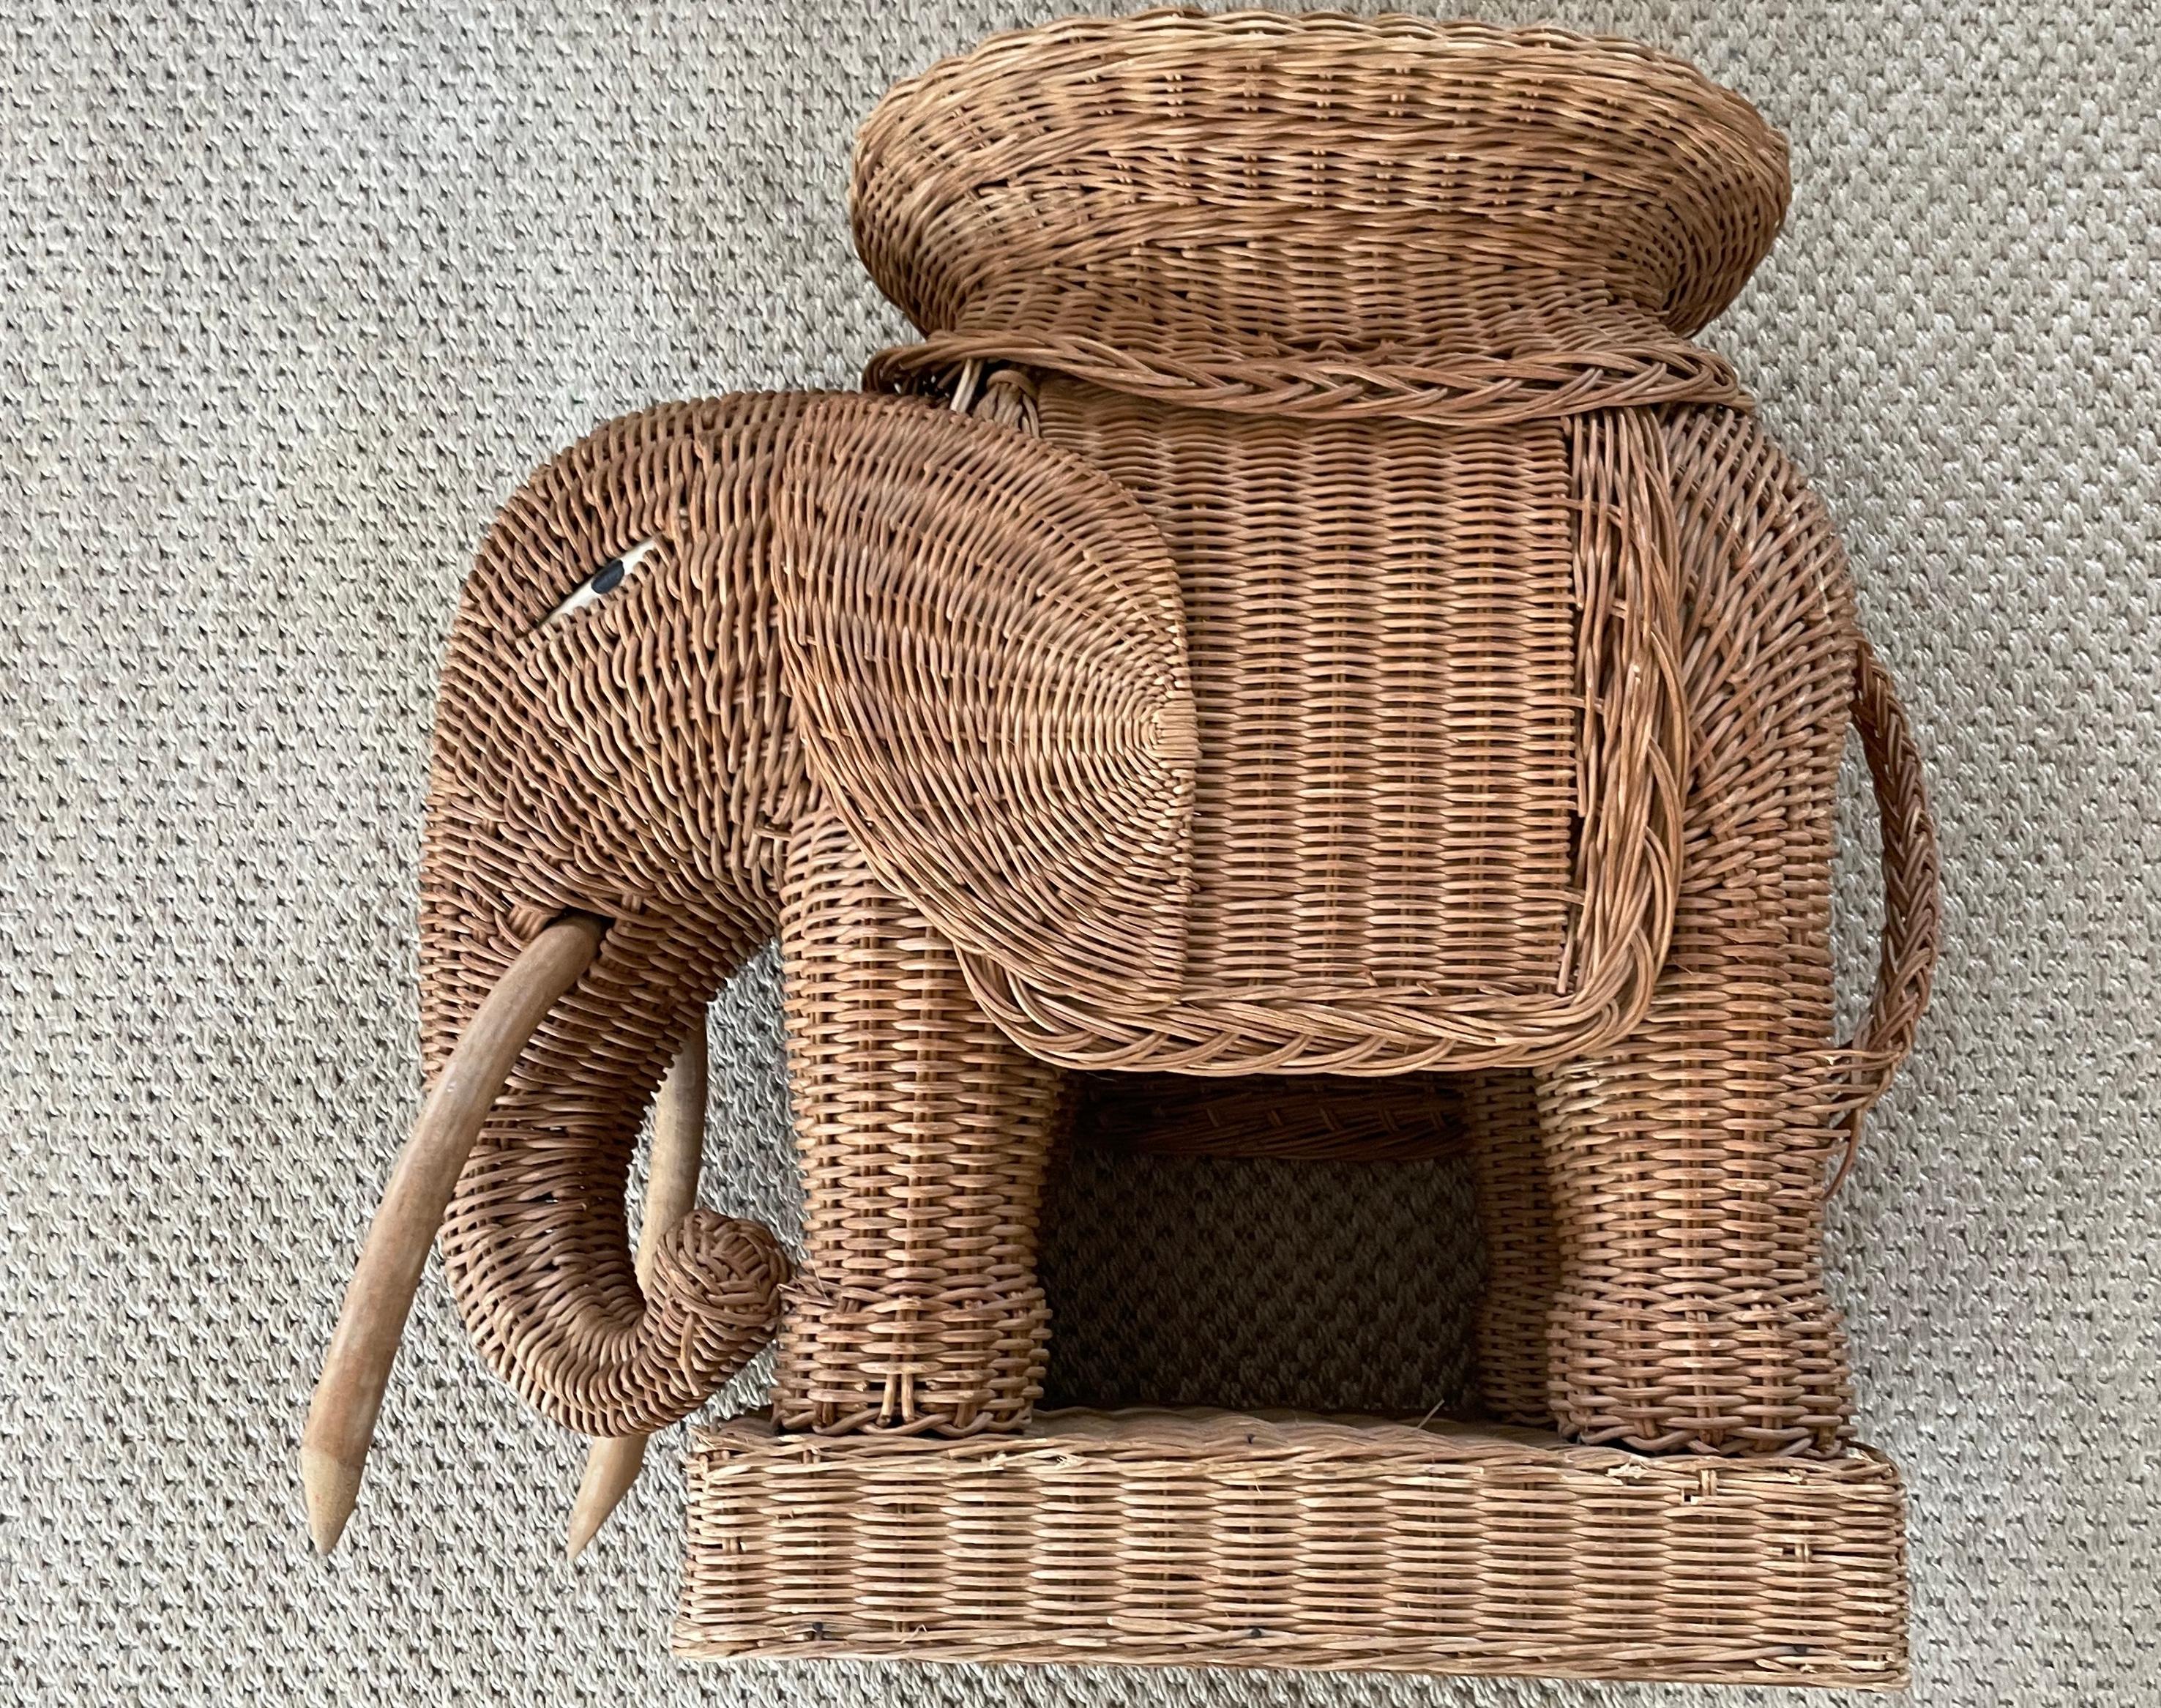 Hand-Crafted Rattan Wicker Elephant Table